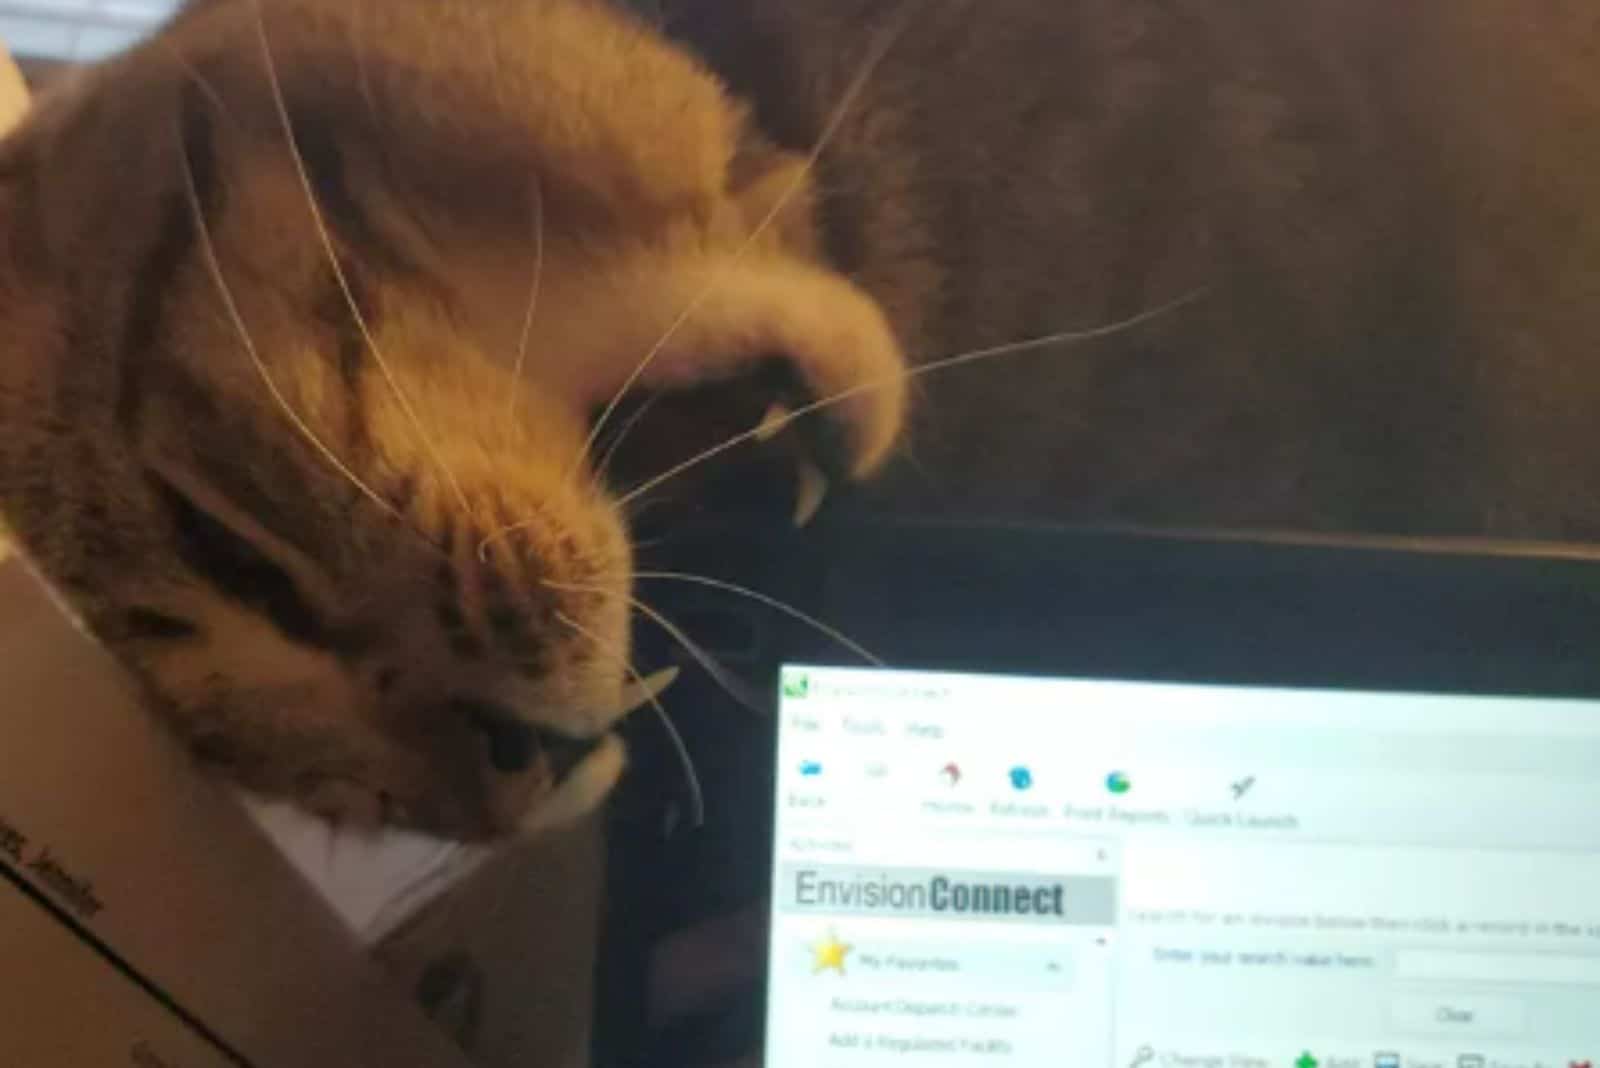 funny photo of a cat biting a laptop